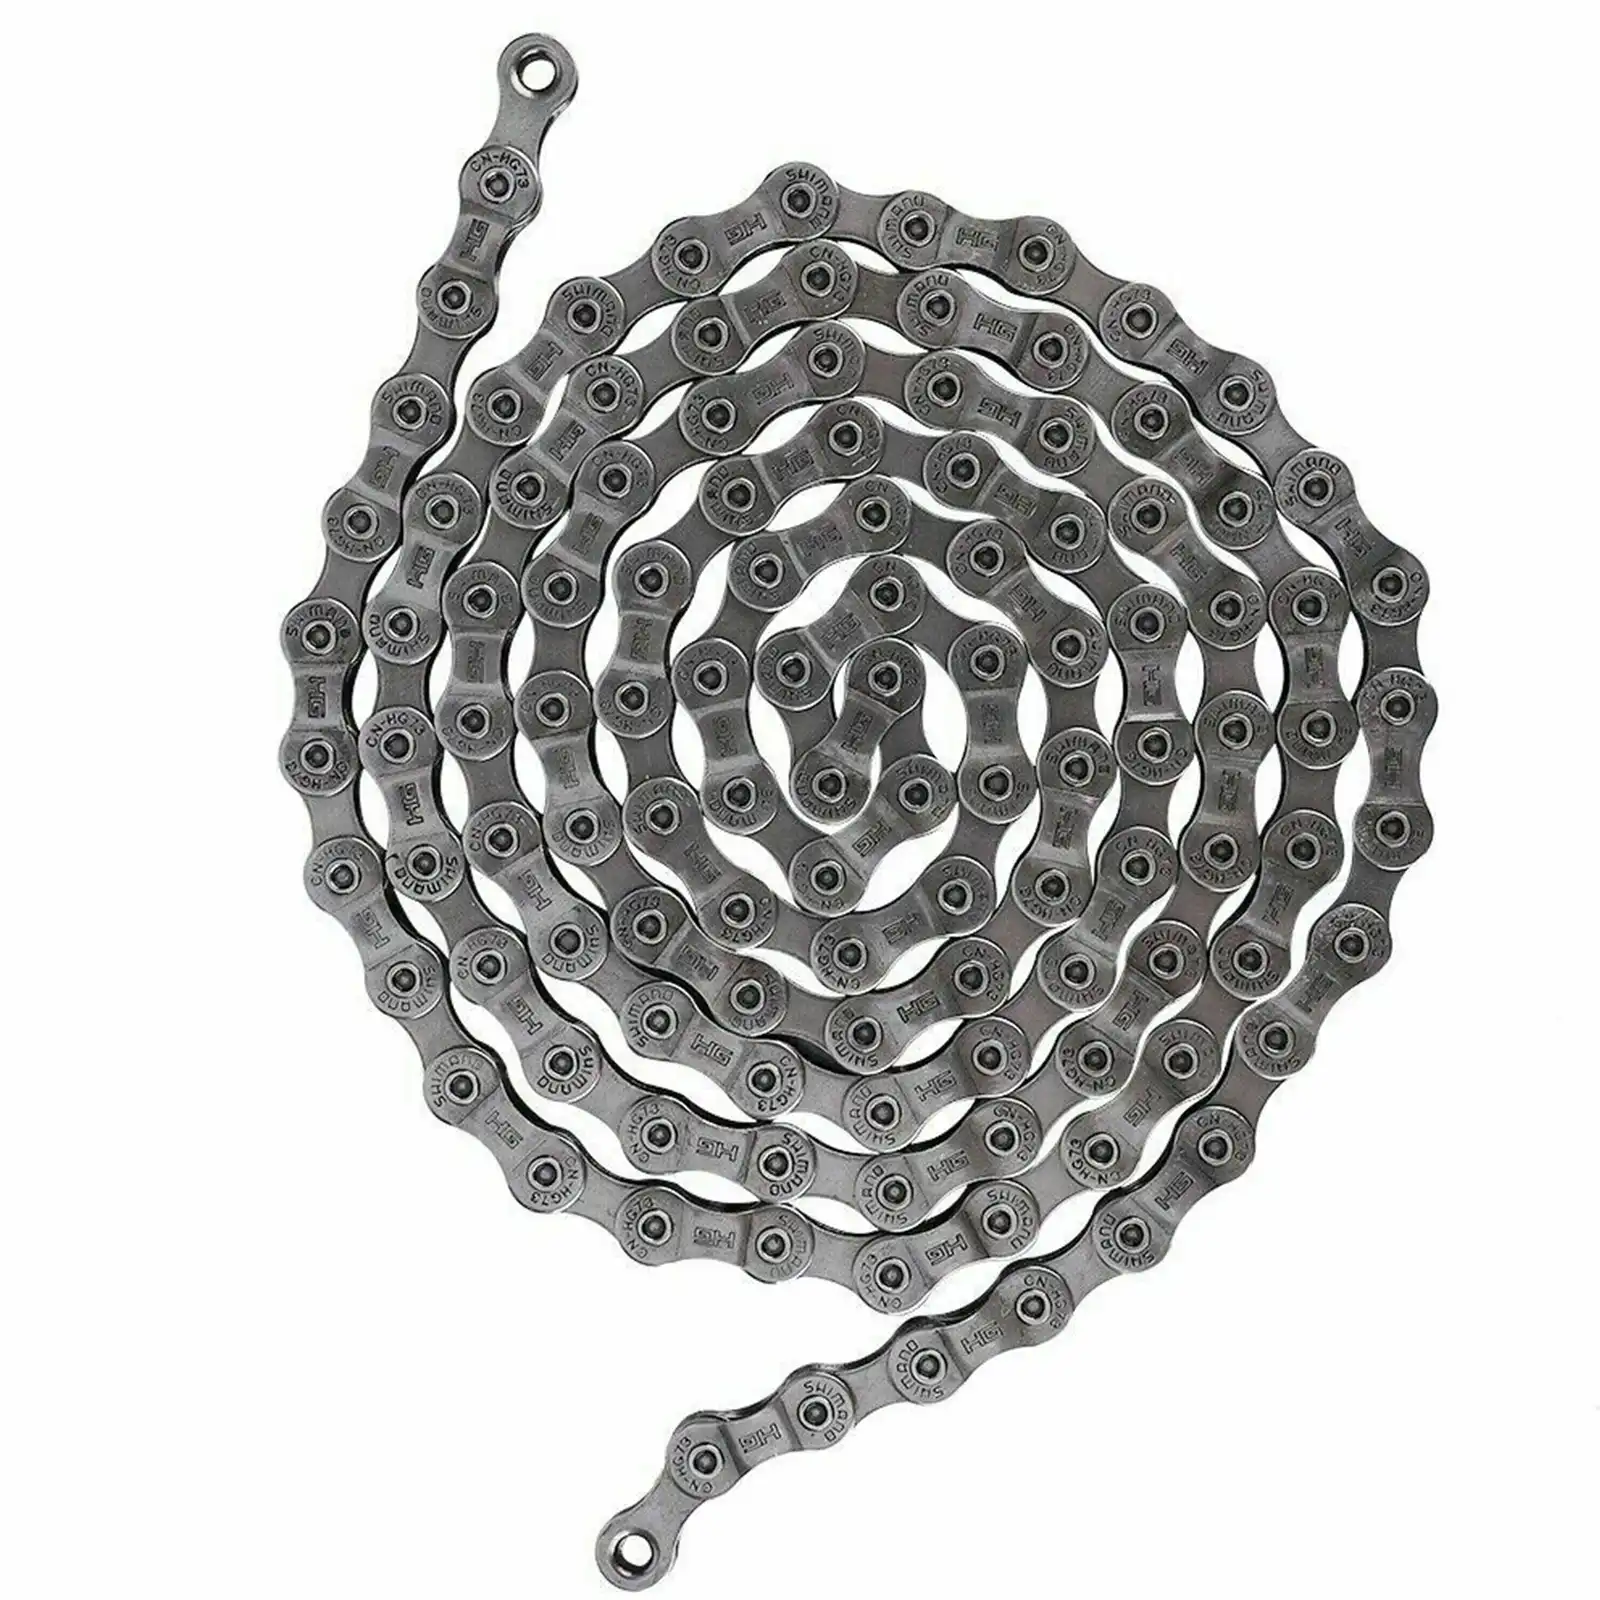 Details about   9-Speed CN-HG73 116 Links HG-73 Bike Bicycle Chain for  Deore LX 105 NEW